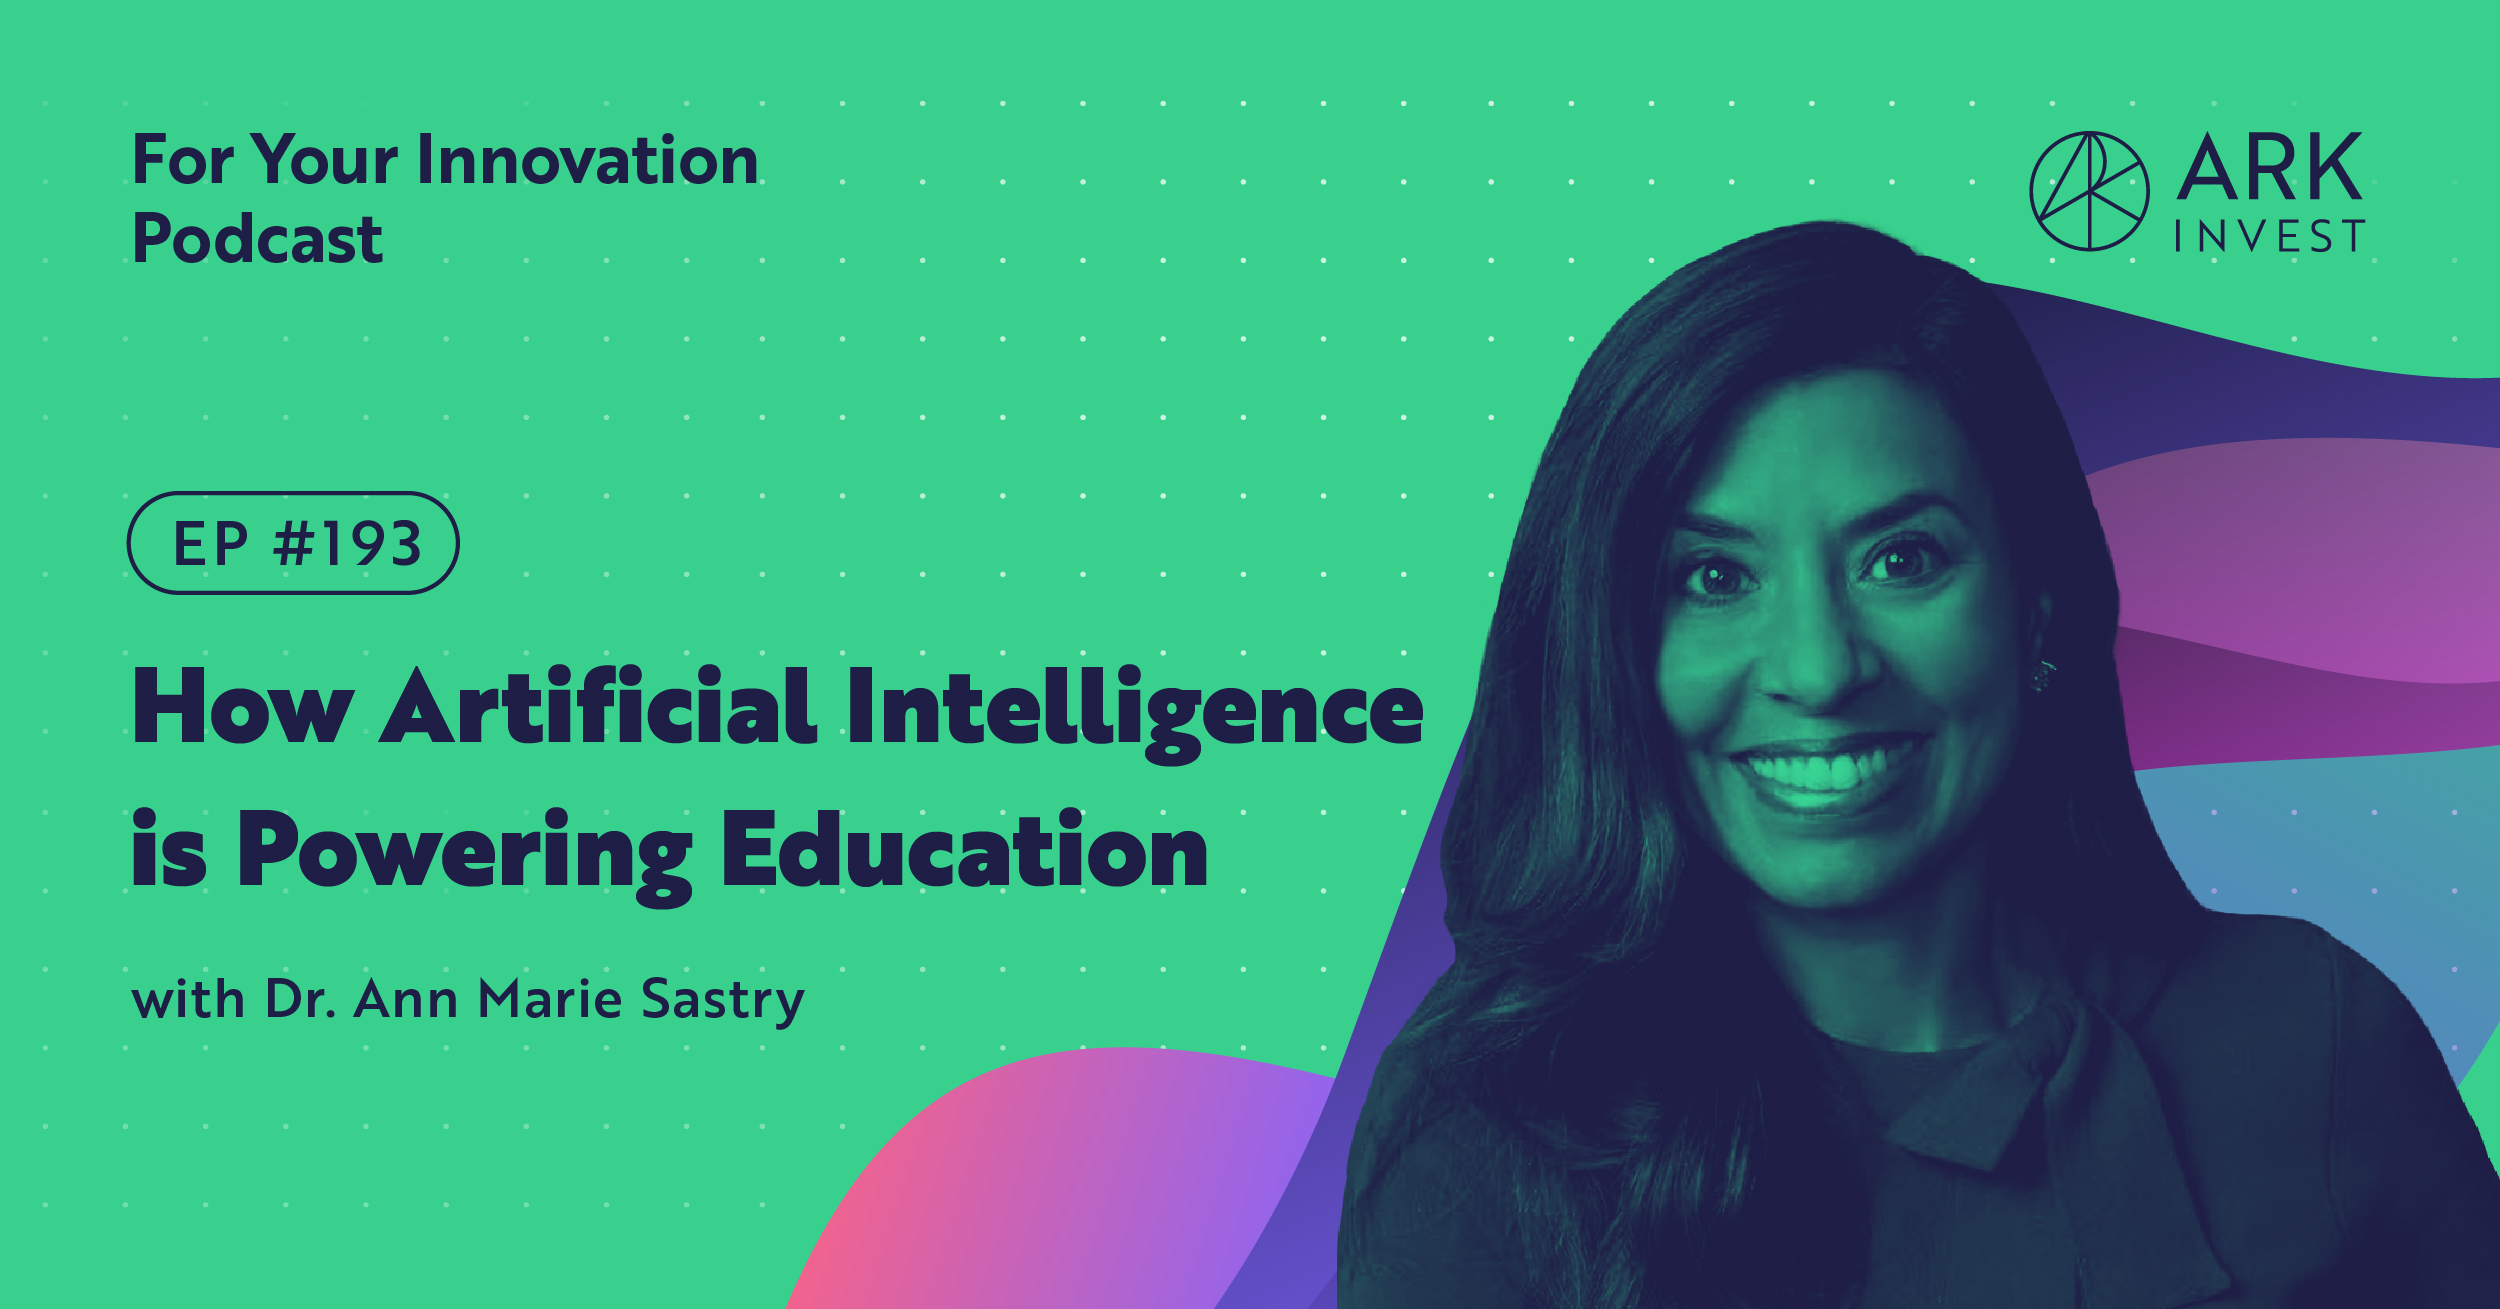 How Artificial Intelligence is Powering Education with Dr. Ann Marie Sastry  - ARK Podcast